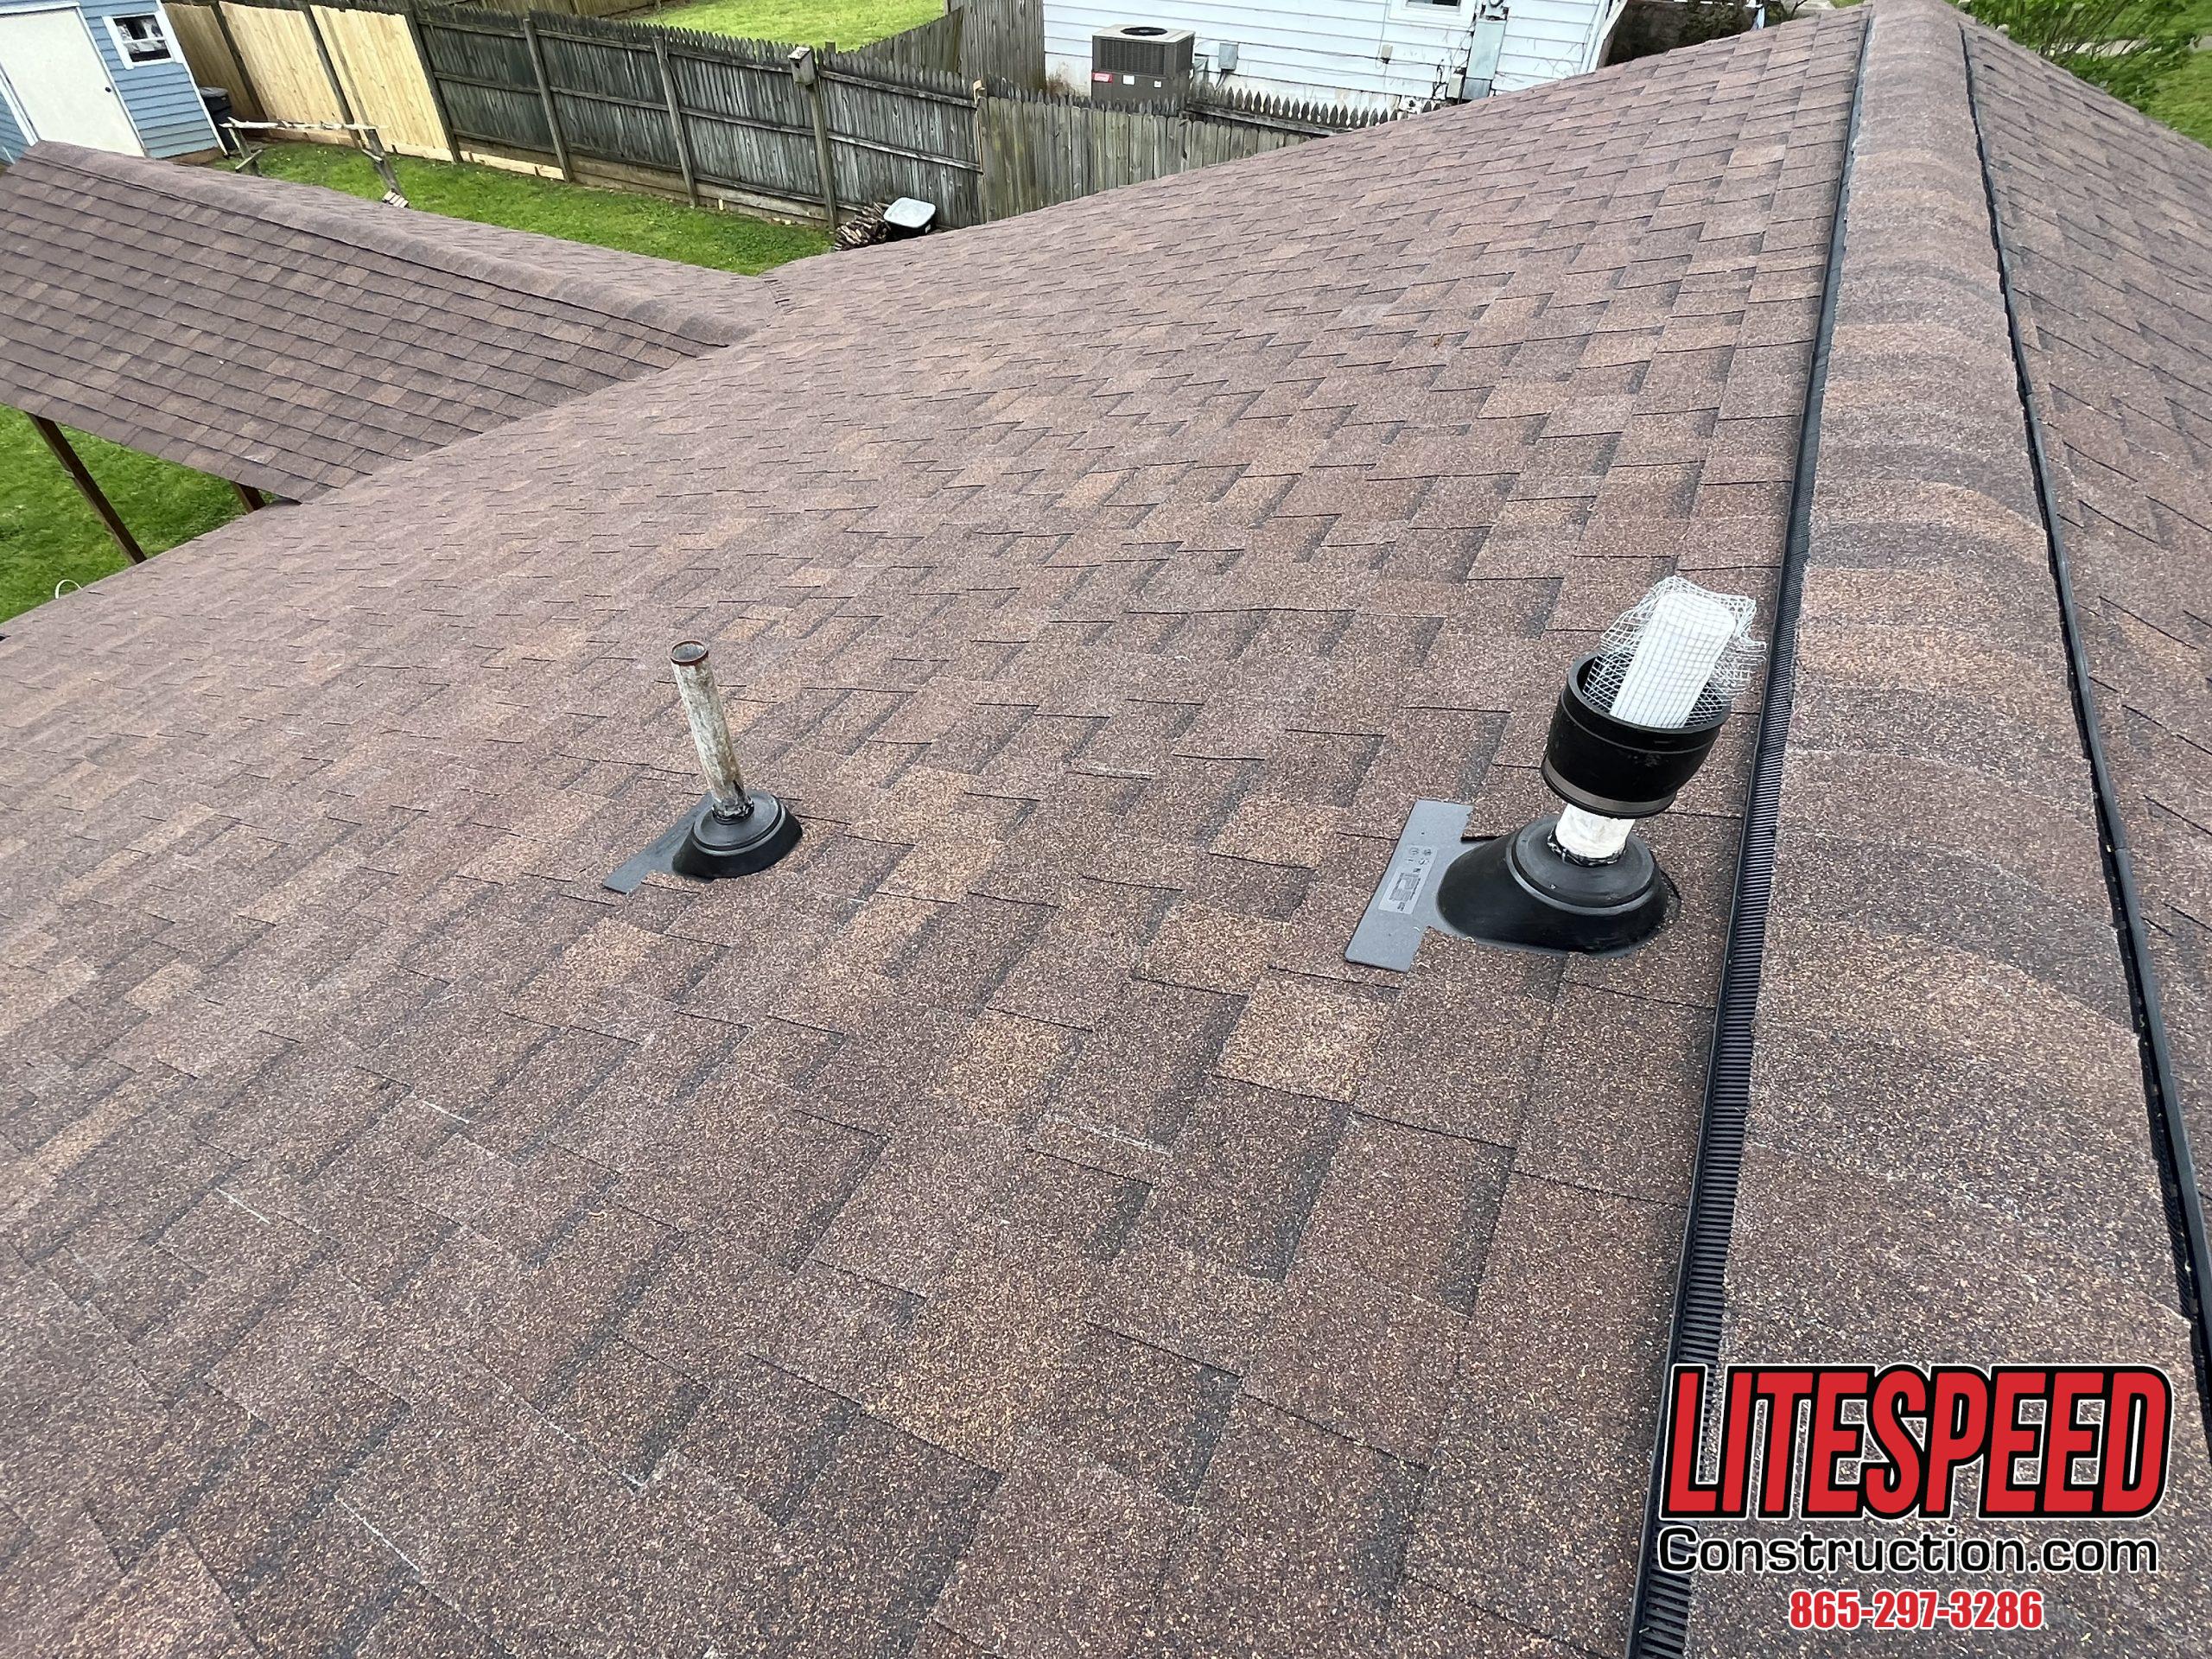 This is a picture of brown shingles with new pipe boots